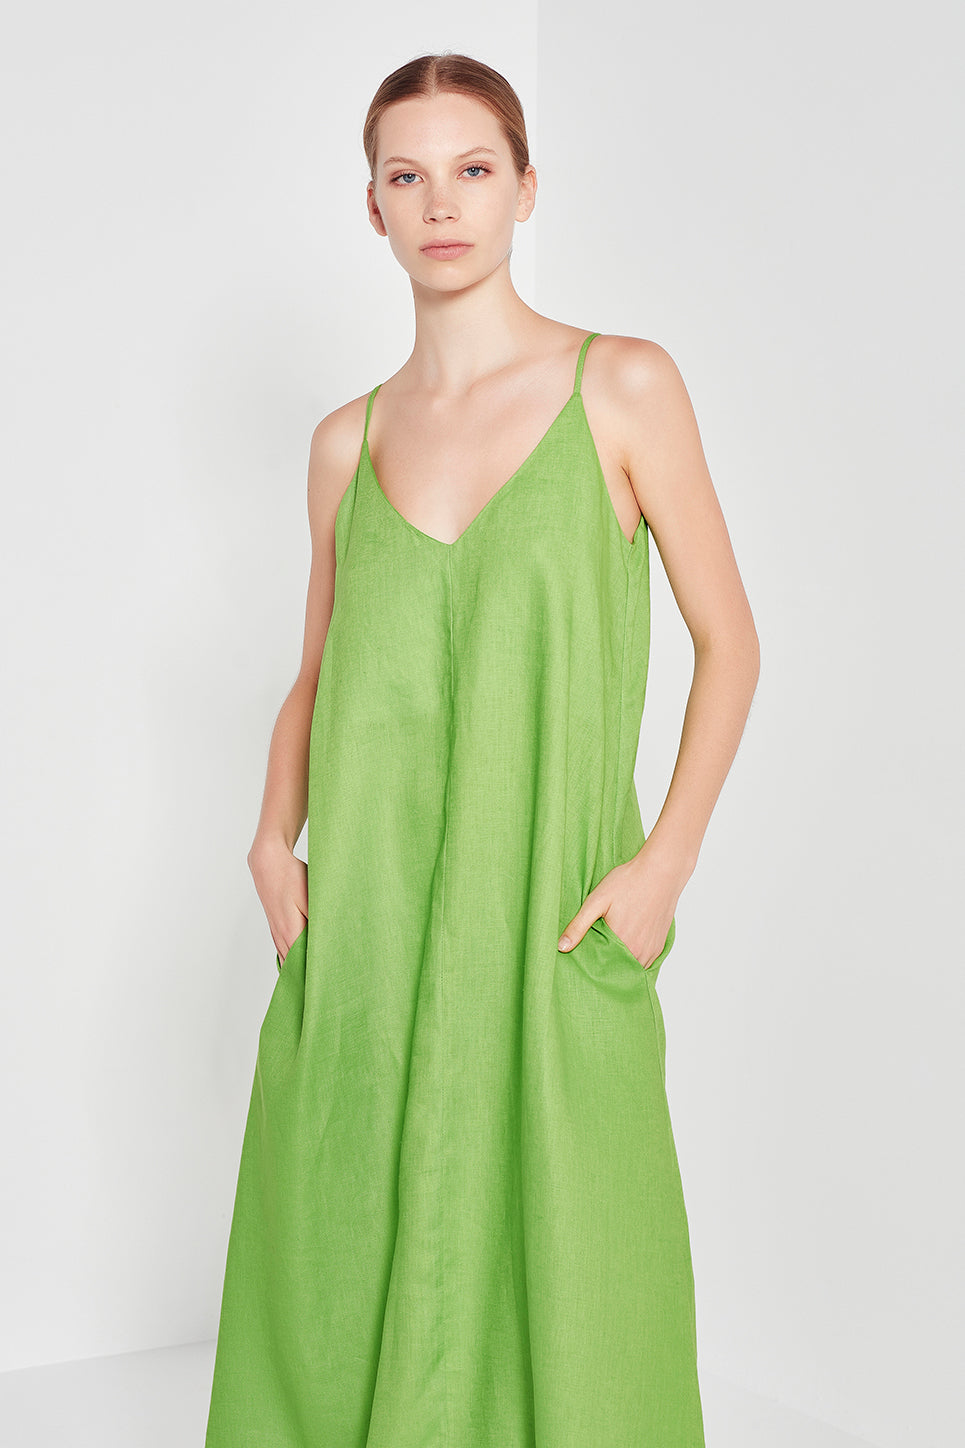 The Marnie 2-Way Sun Dress in Lime